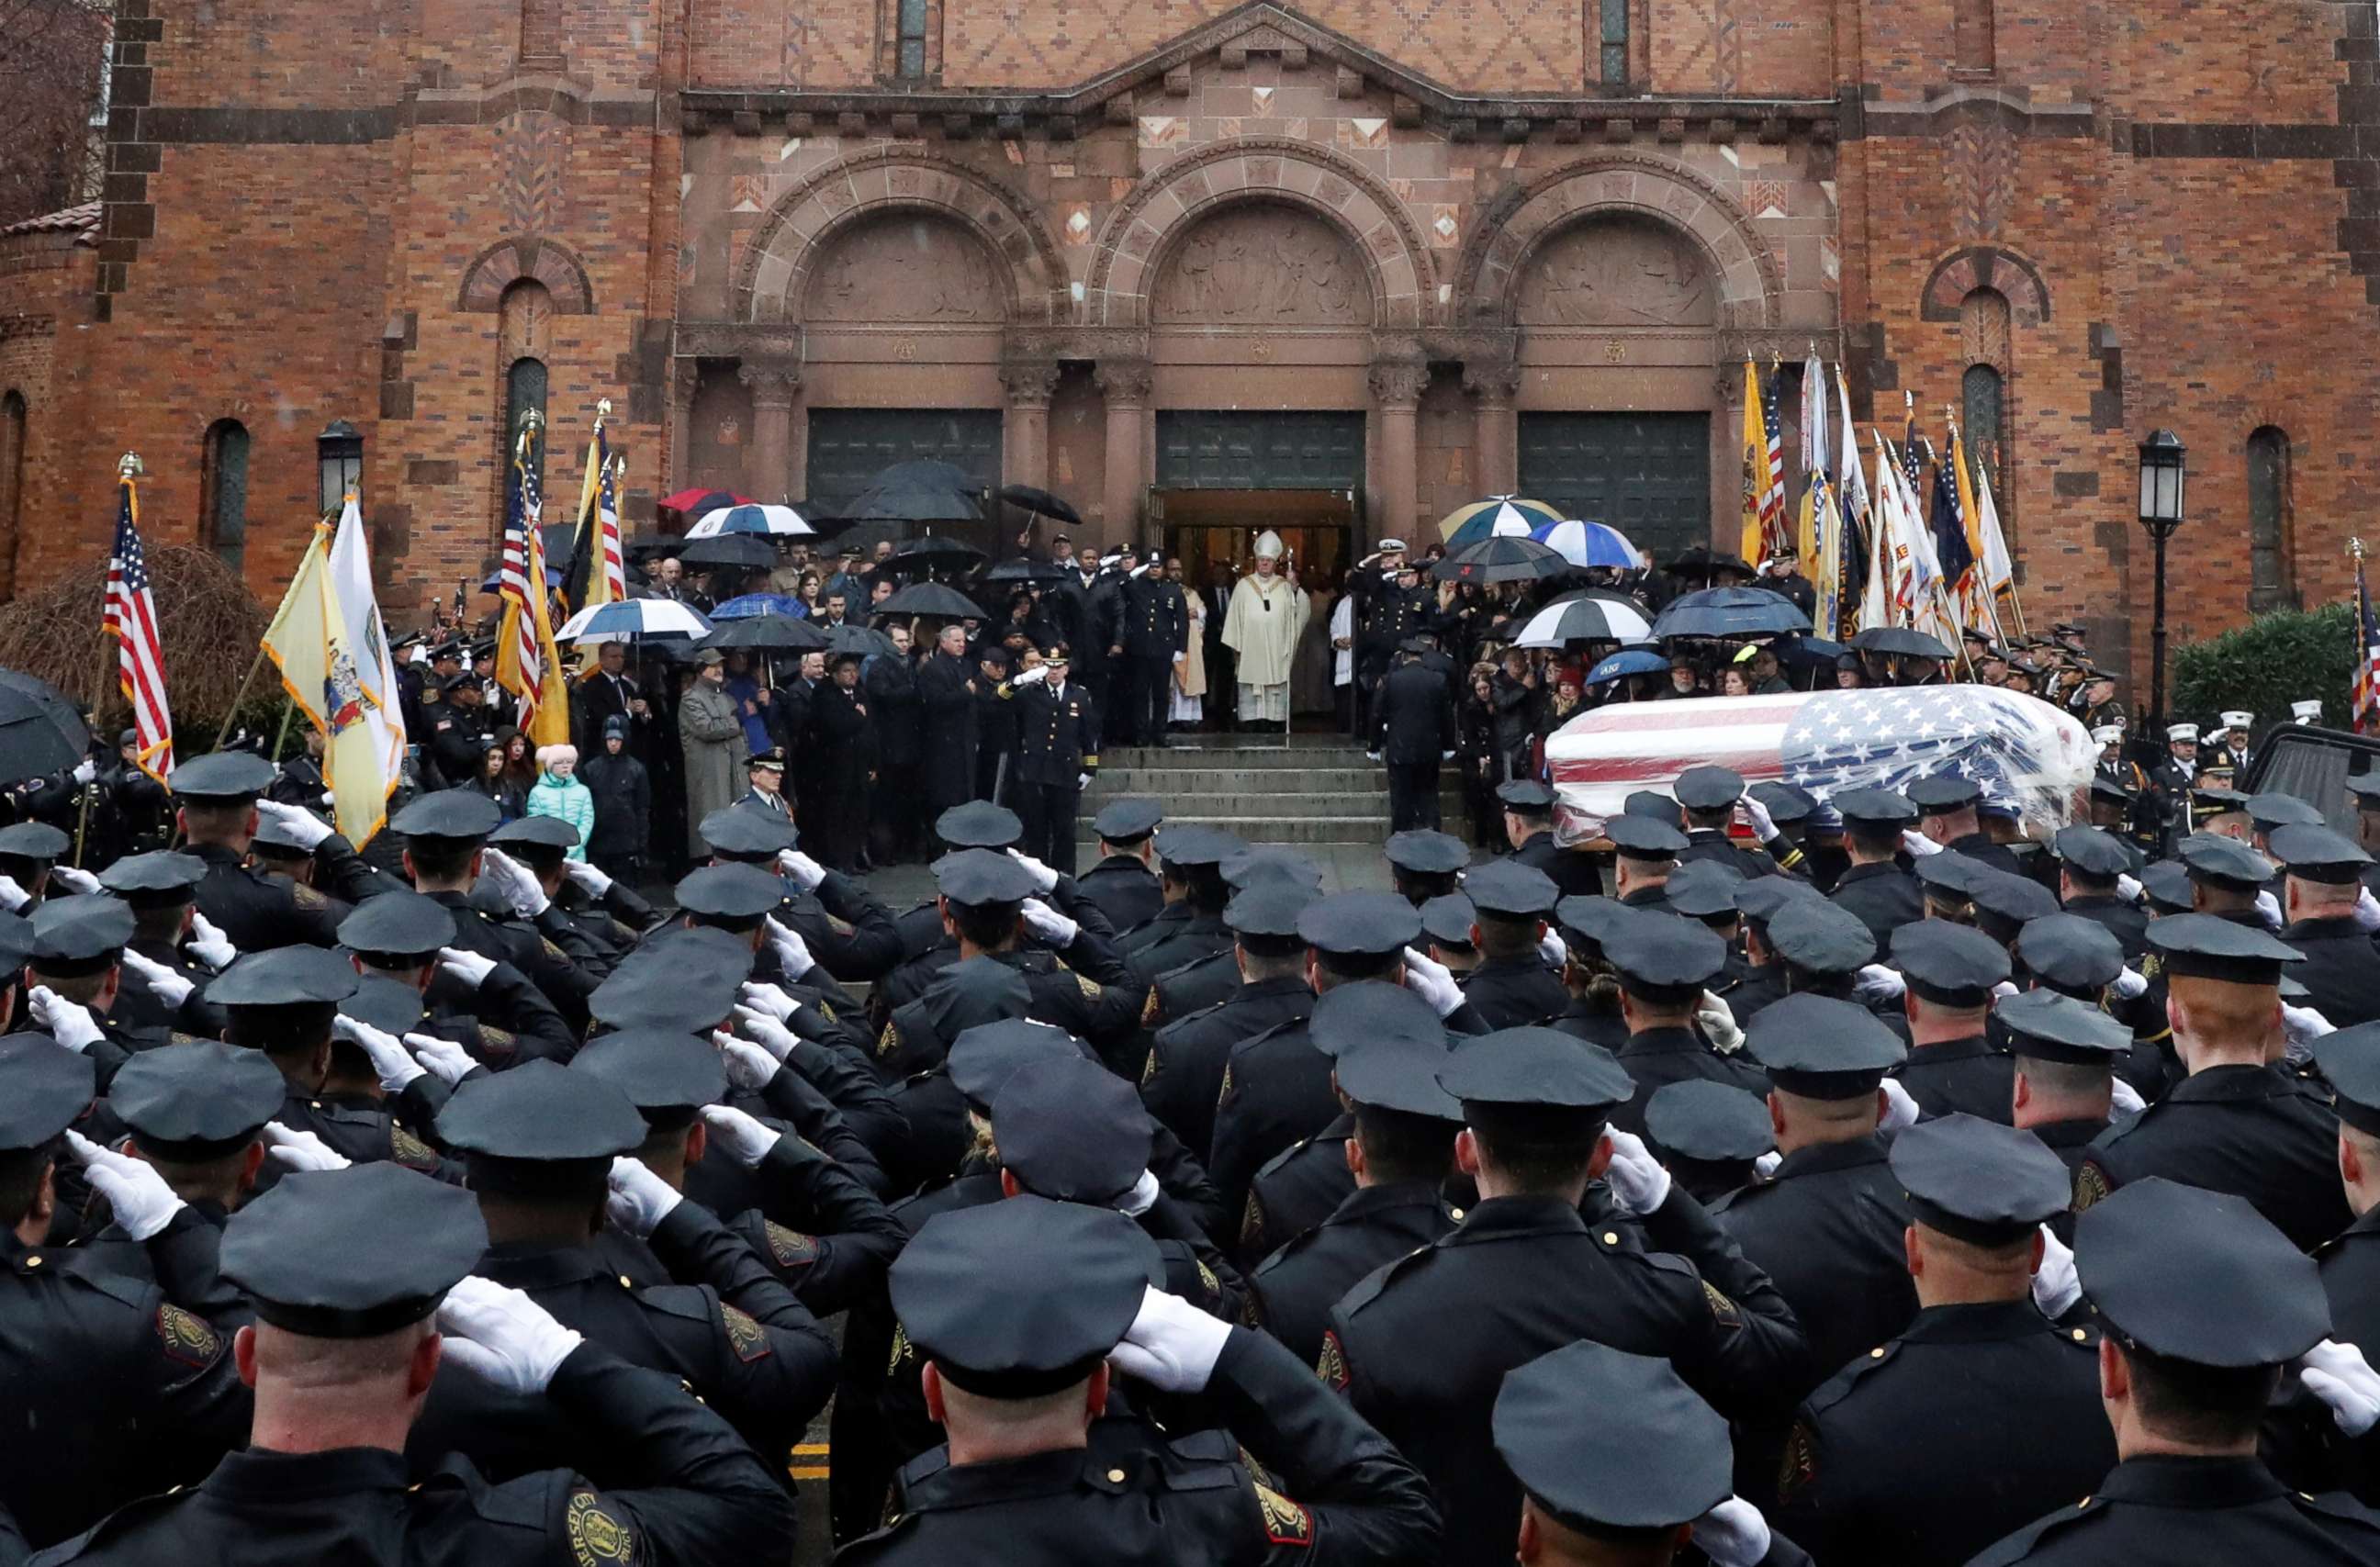 PHOTO: Police officers stand and salute as the casket is carried into the funeral service for Jersey City Police Detective Joseph Seals at St. Aedan's Church in Jersey City, N.J., Dec. 17, 2019.